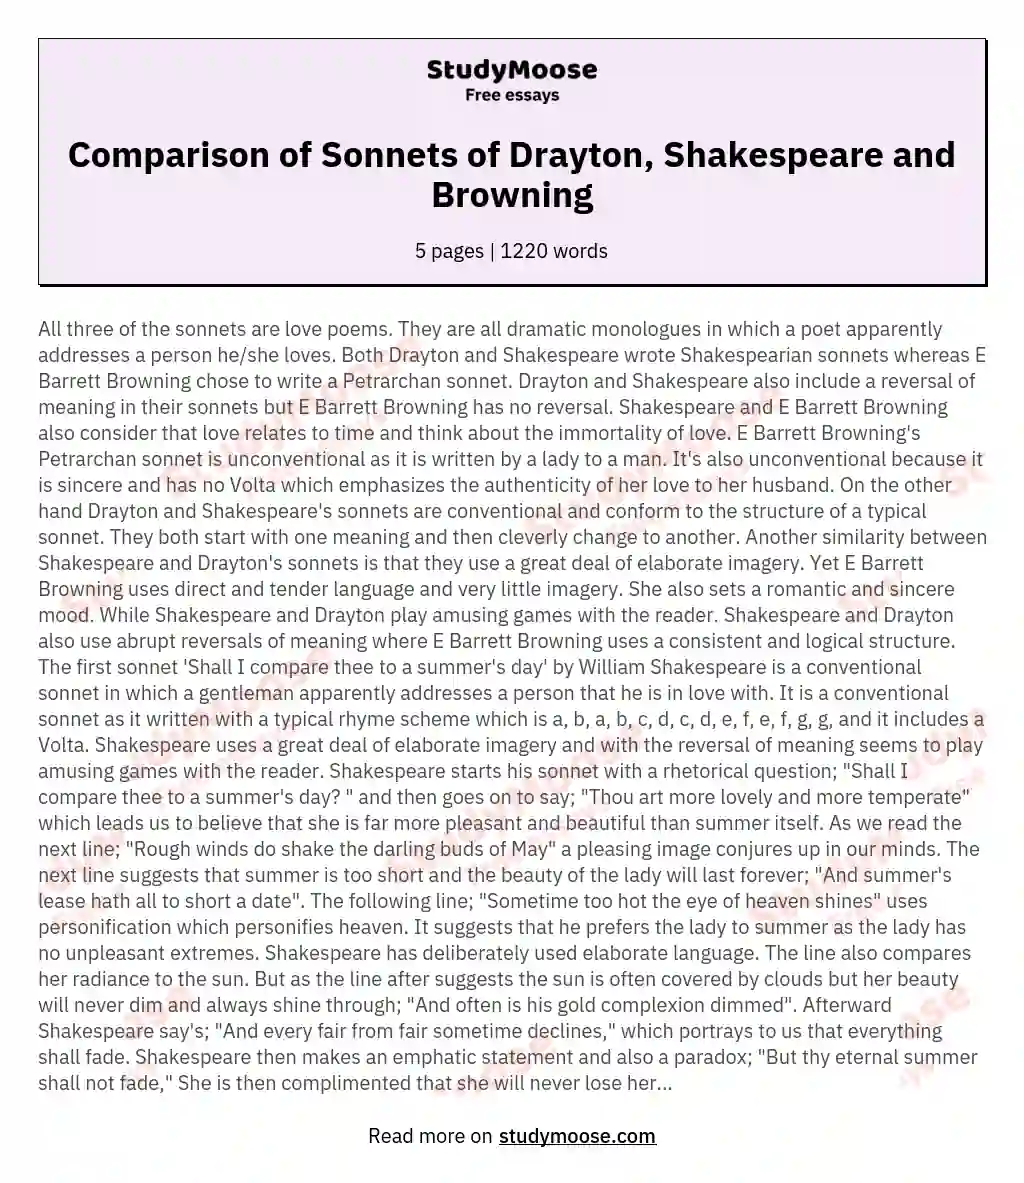 Comparison of Sonnets of Drayton, Shakespeare and Browning essay